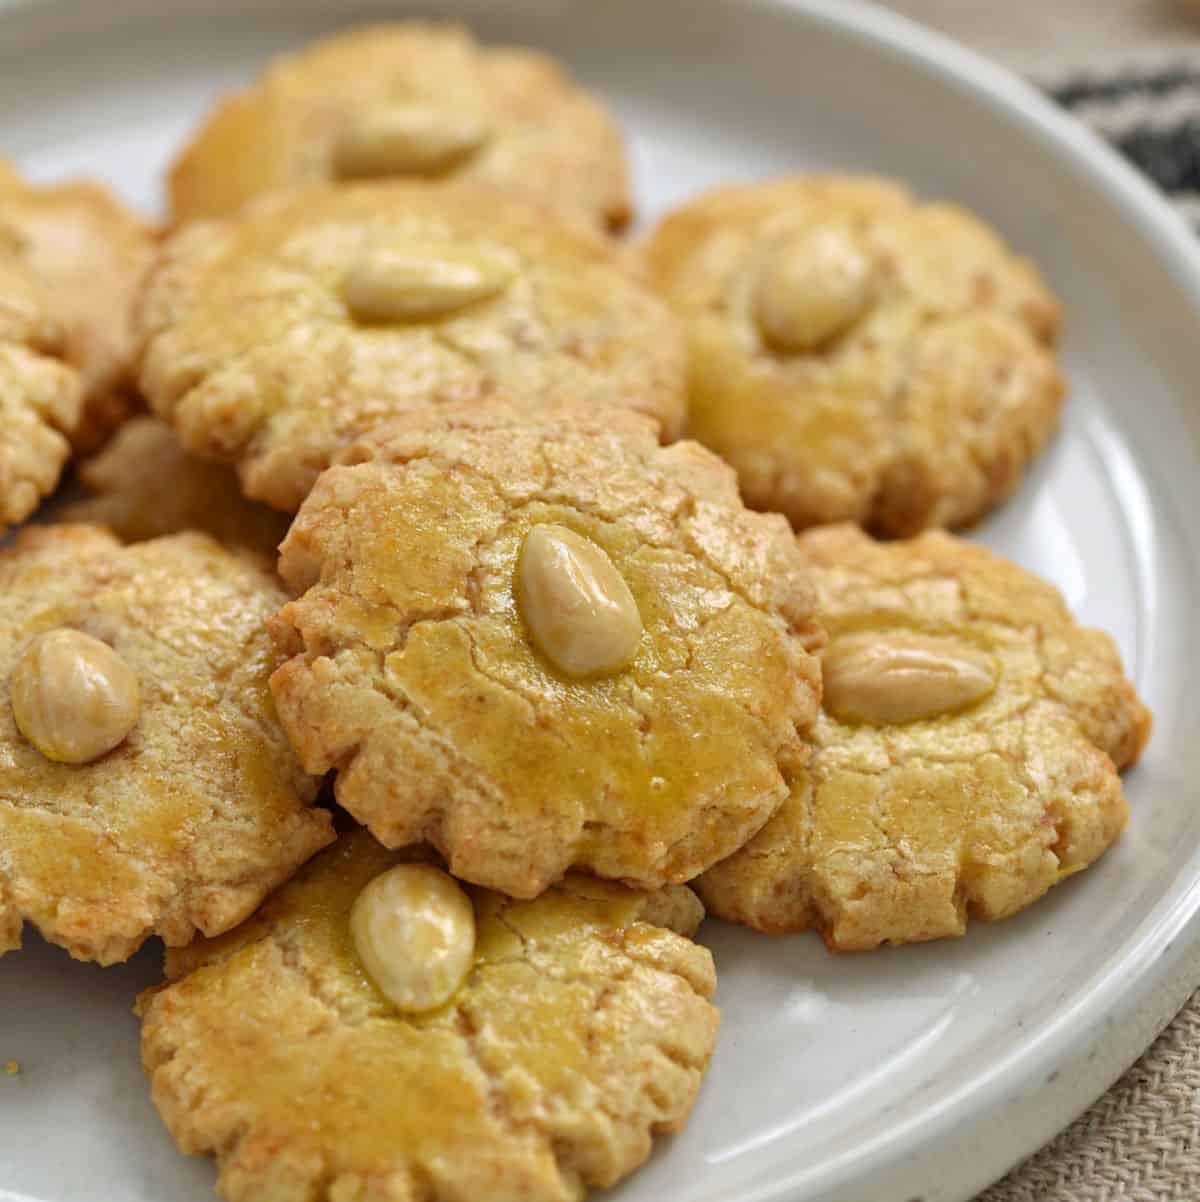 Ten Chinese Almond Cookies stacked on a white plate.